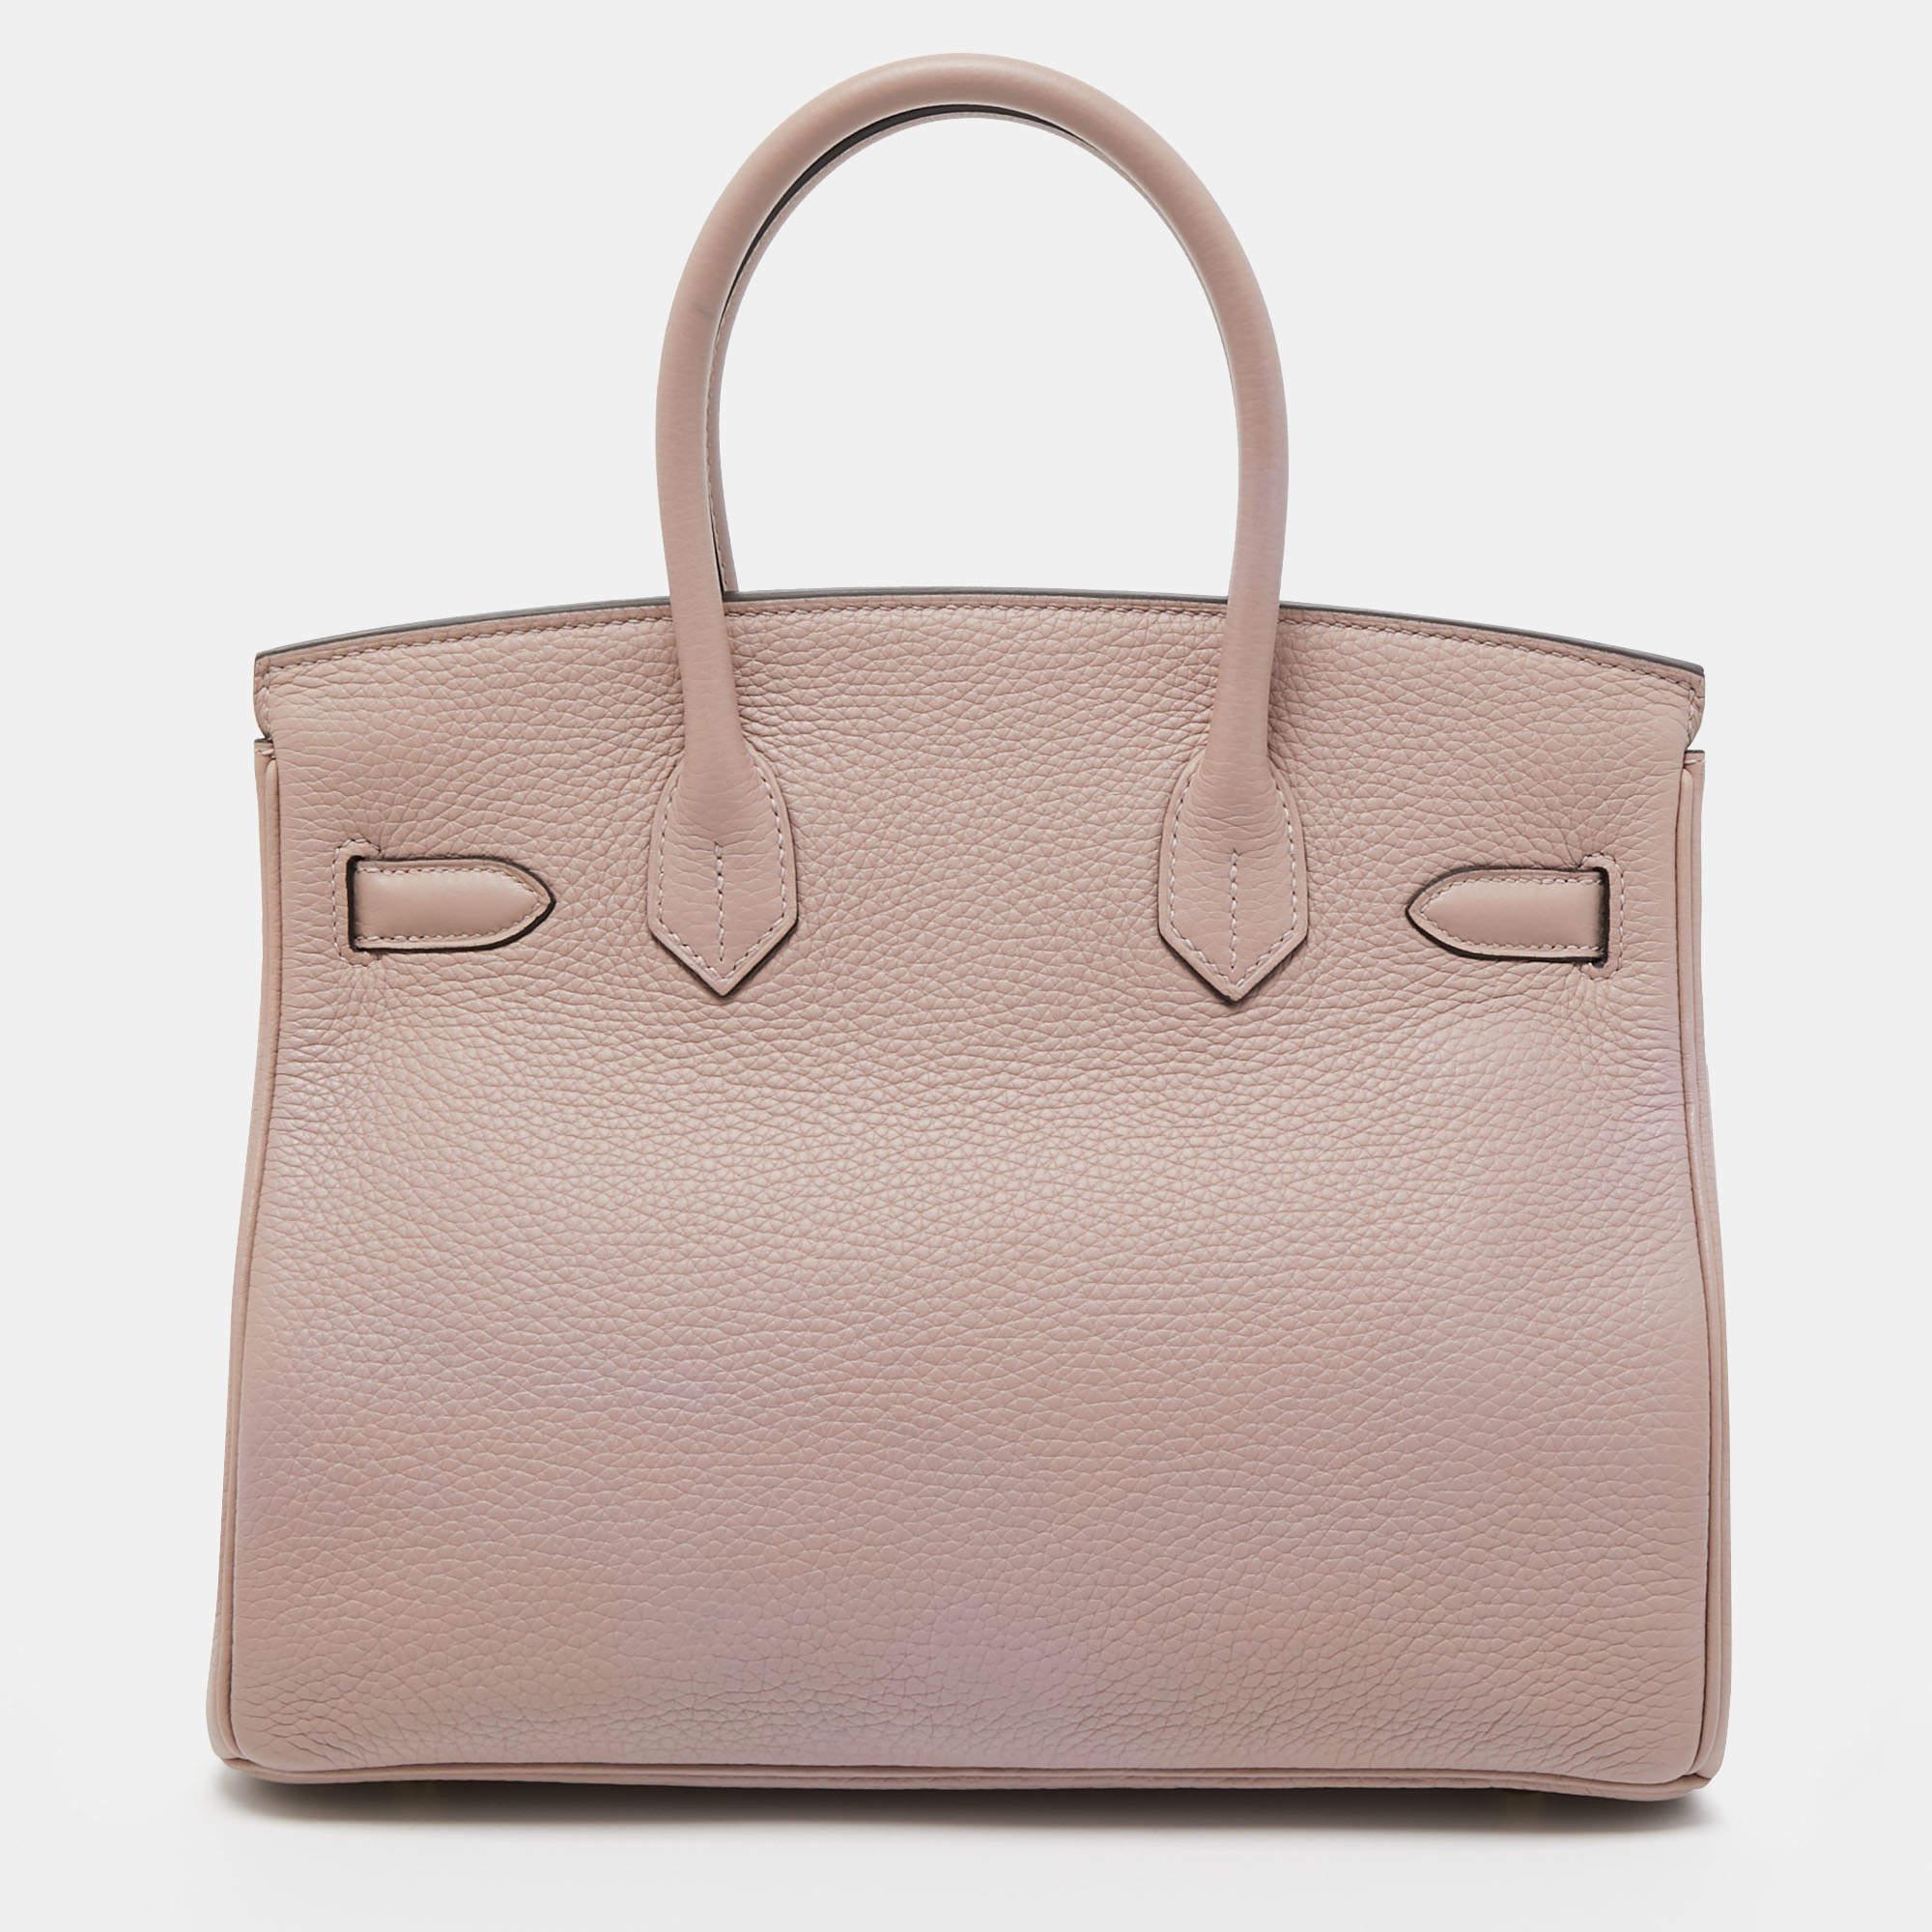 The iconic Hermès Birkin is rightly one of the most desired handbags in the world. Handcrafted from the highest quality leather by skilled artisans, it takes long hours of rigorous effort to stitch a Birkin together. Stitched using Taurillon